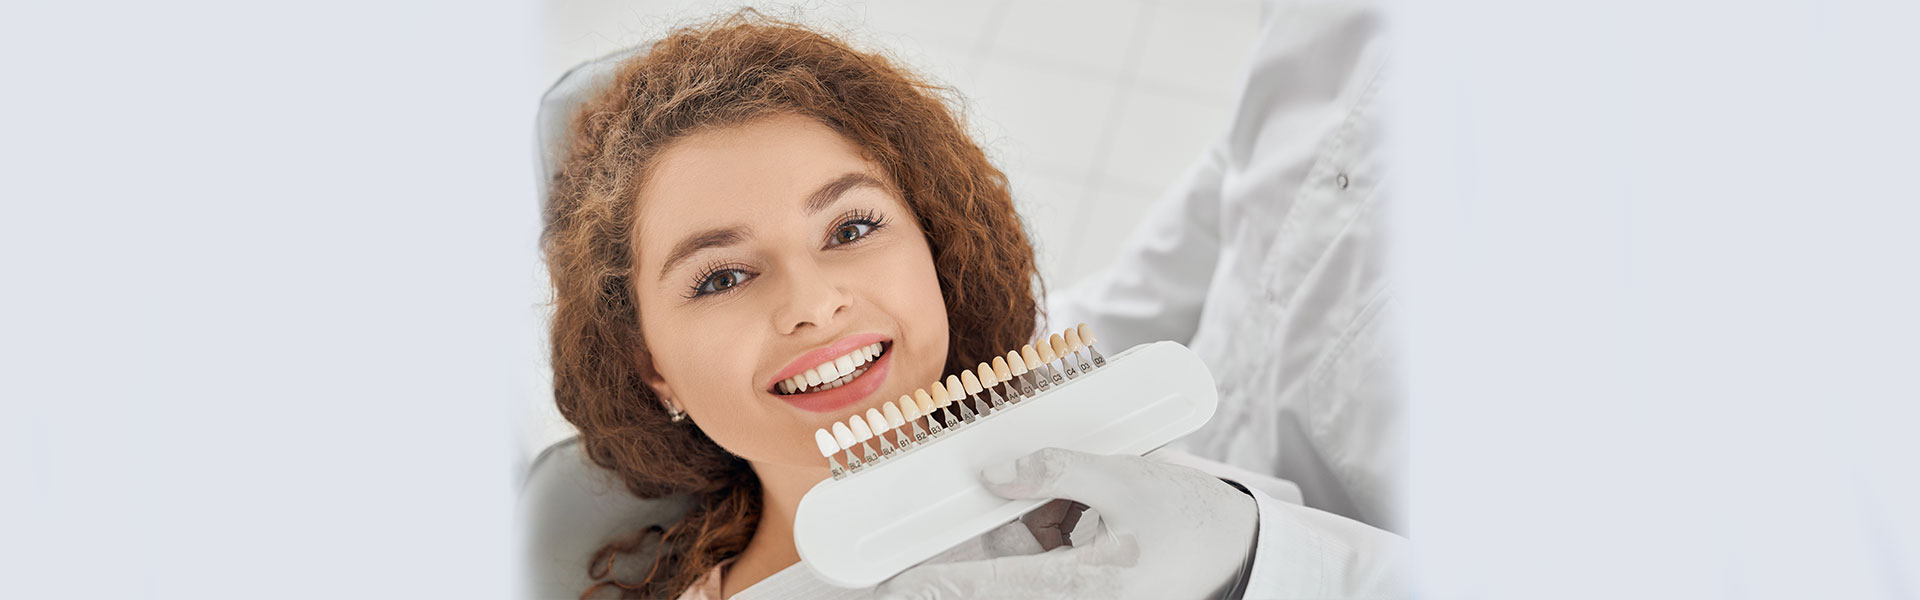 5 Things to Know About Porcelain Veneers for Smile Makeovers